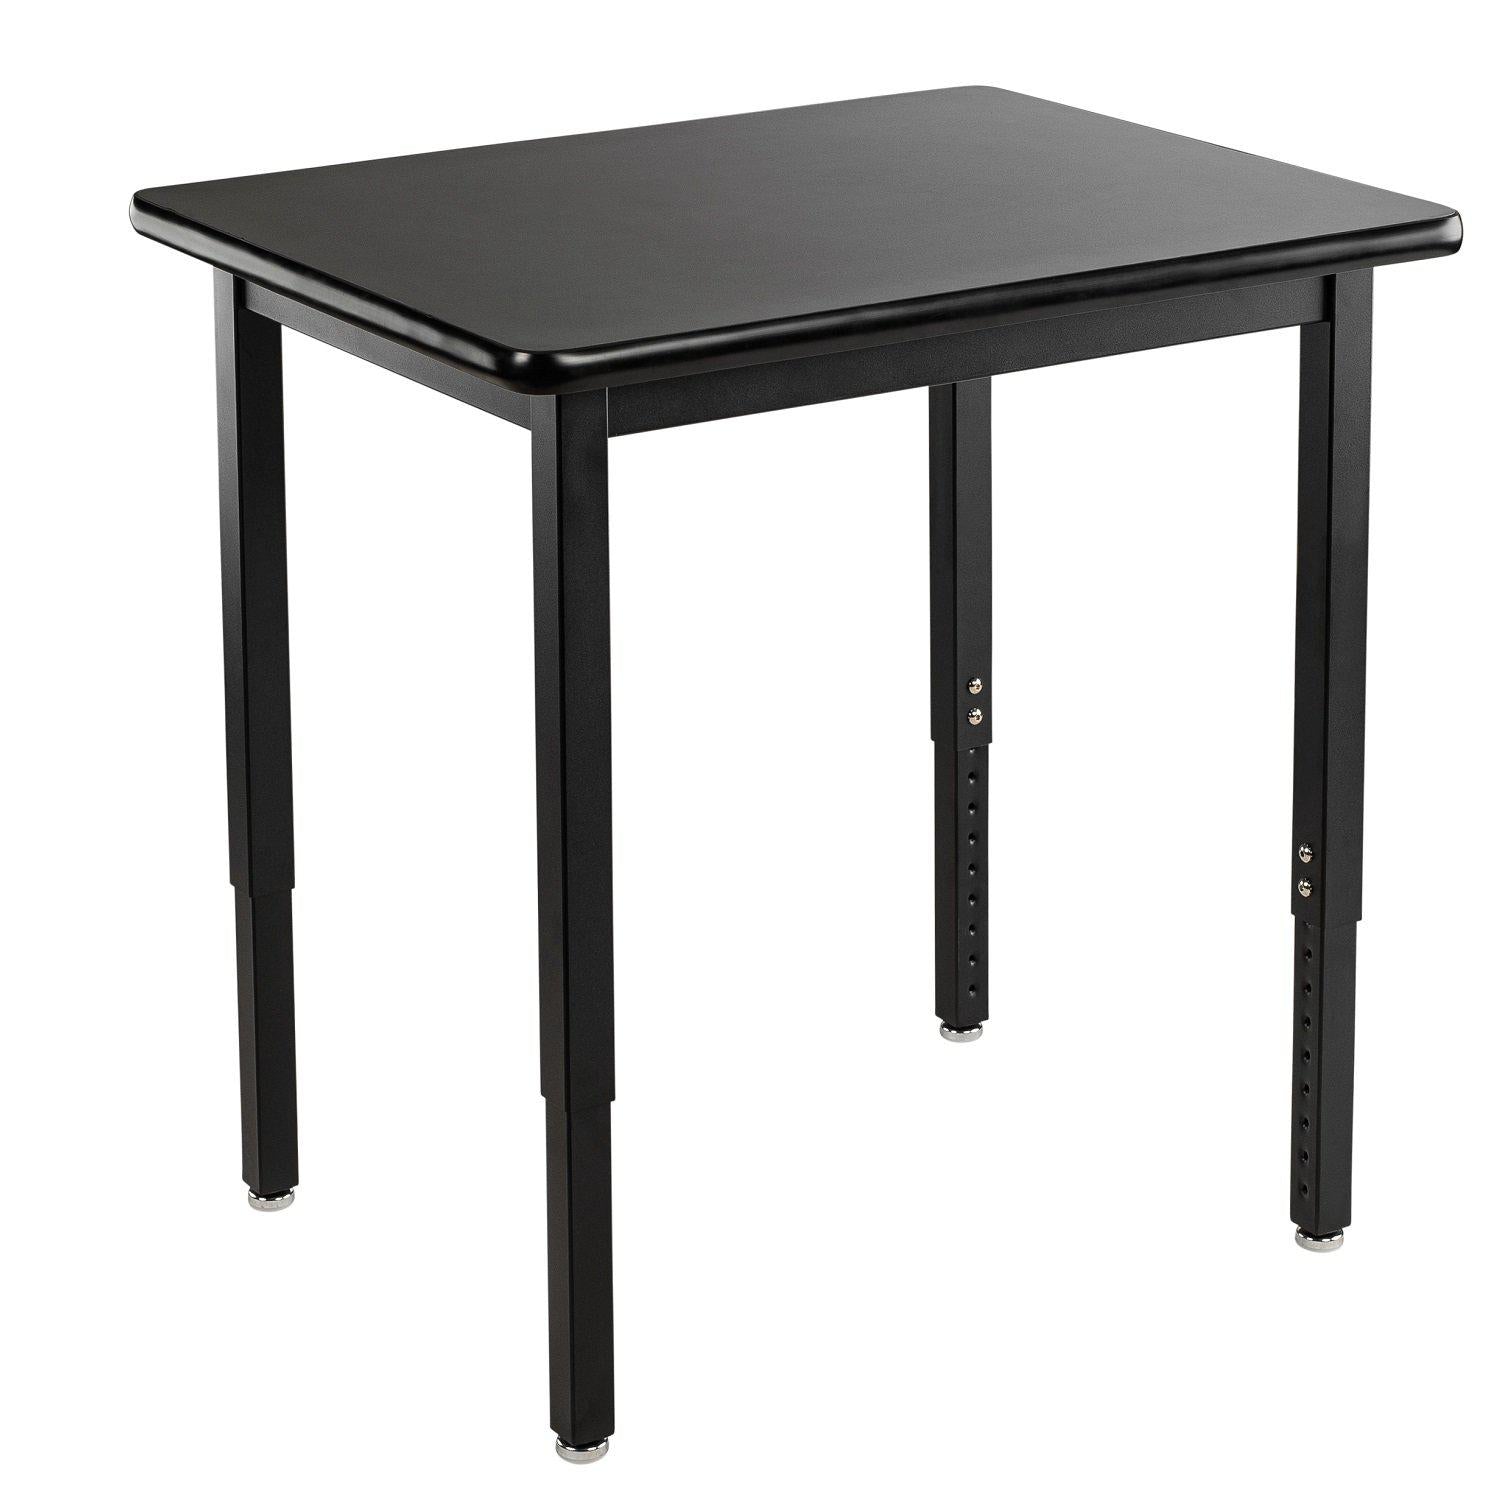 Heavy-Duty Height-Adjustable Utility Table, Black Frame, 30" x 30", High-Pressure Laminate Top with T-Mold Edge